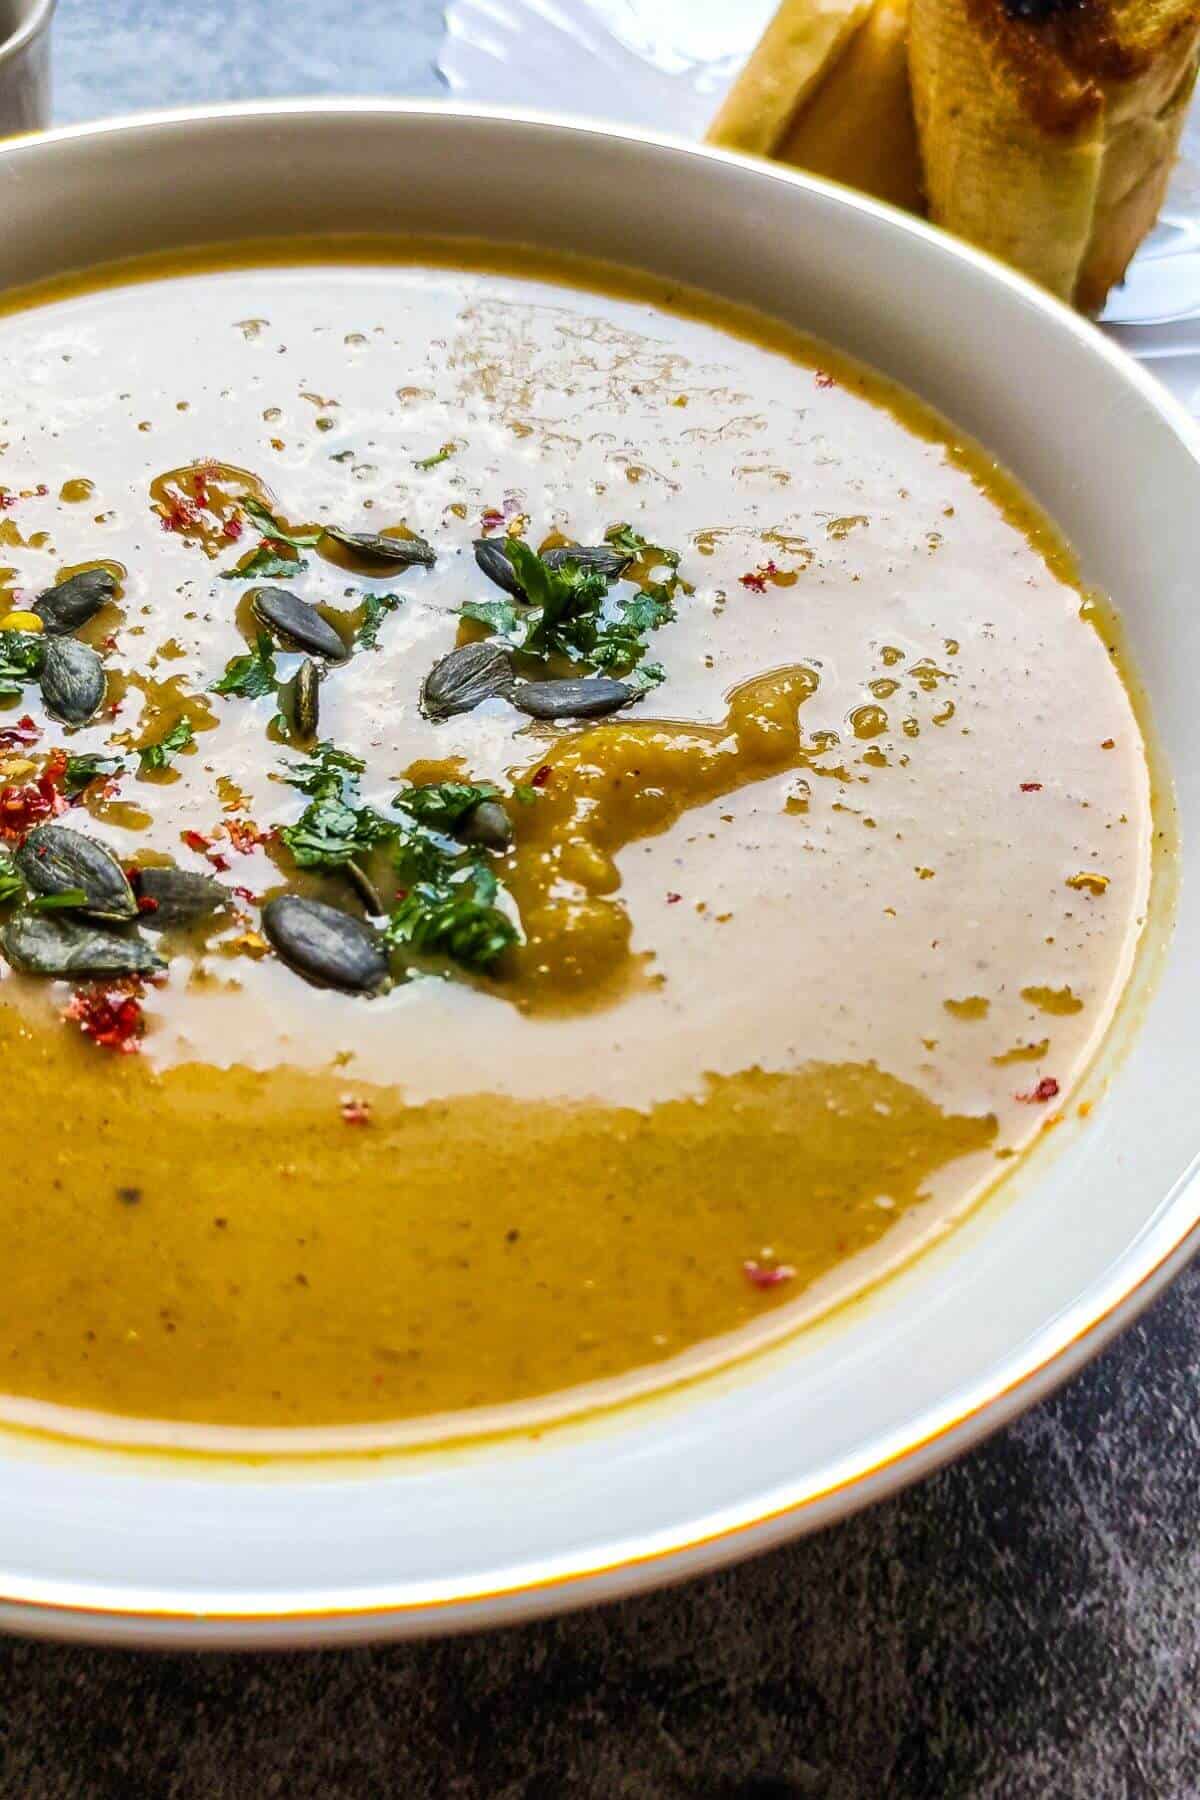 A bowl of vegan pumpkin soup garnished with herbs, pepitas, and chili flakes.